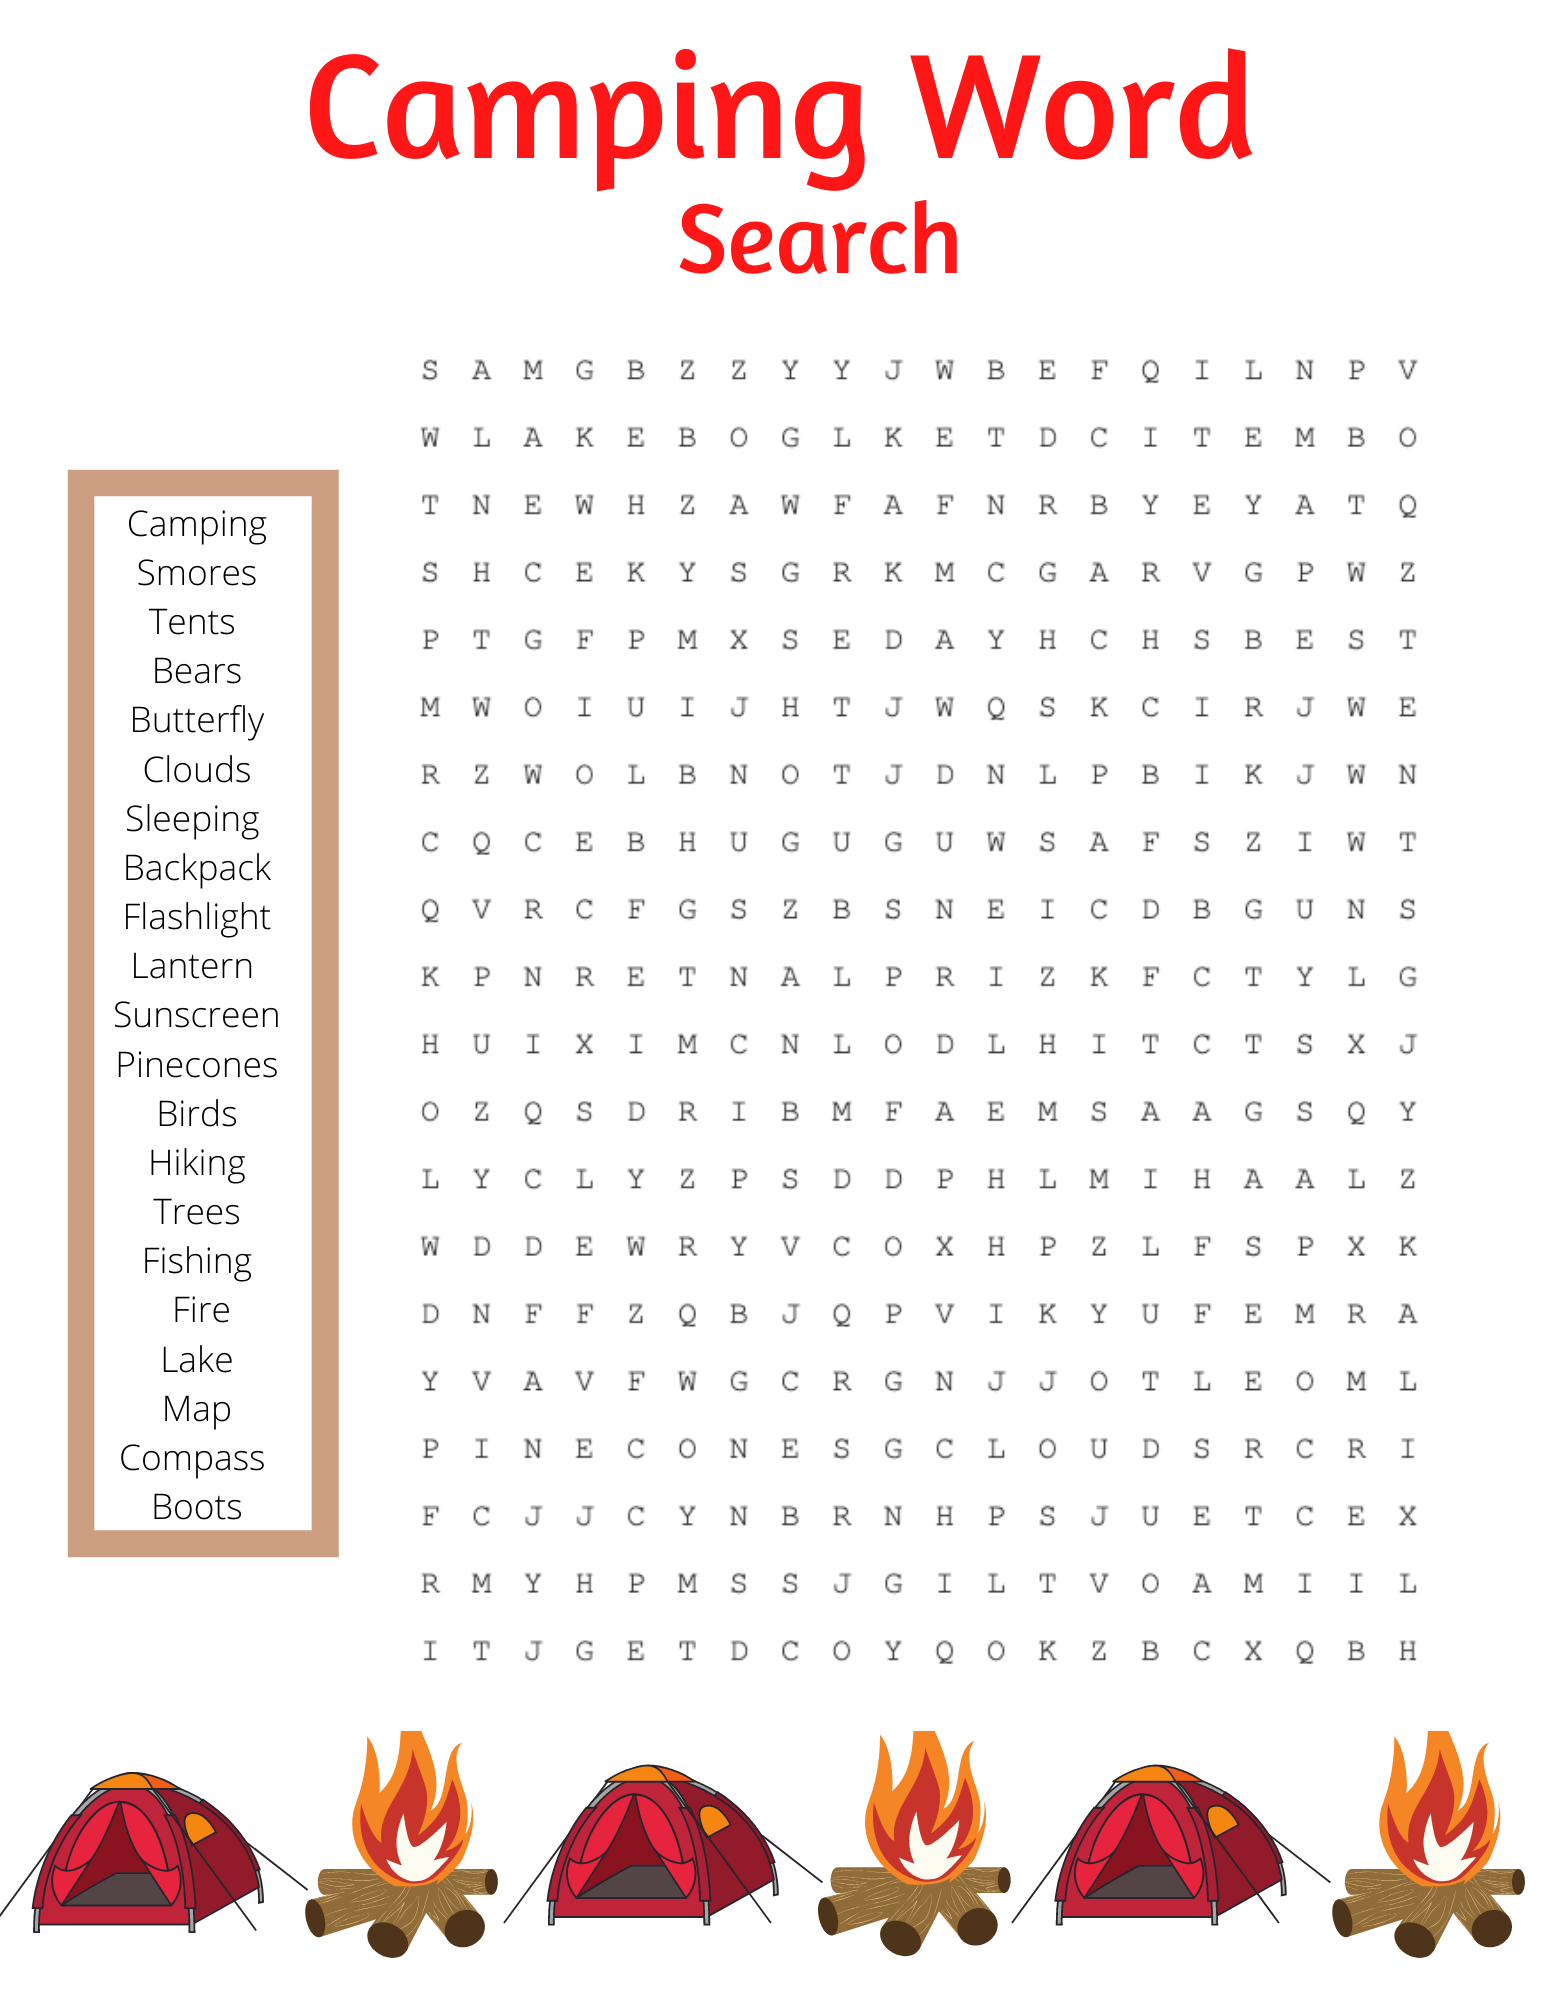 Camping Wordsearch